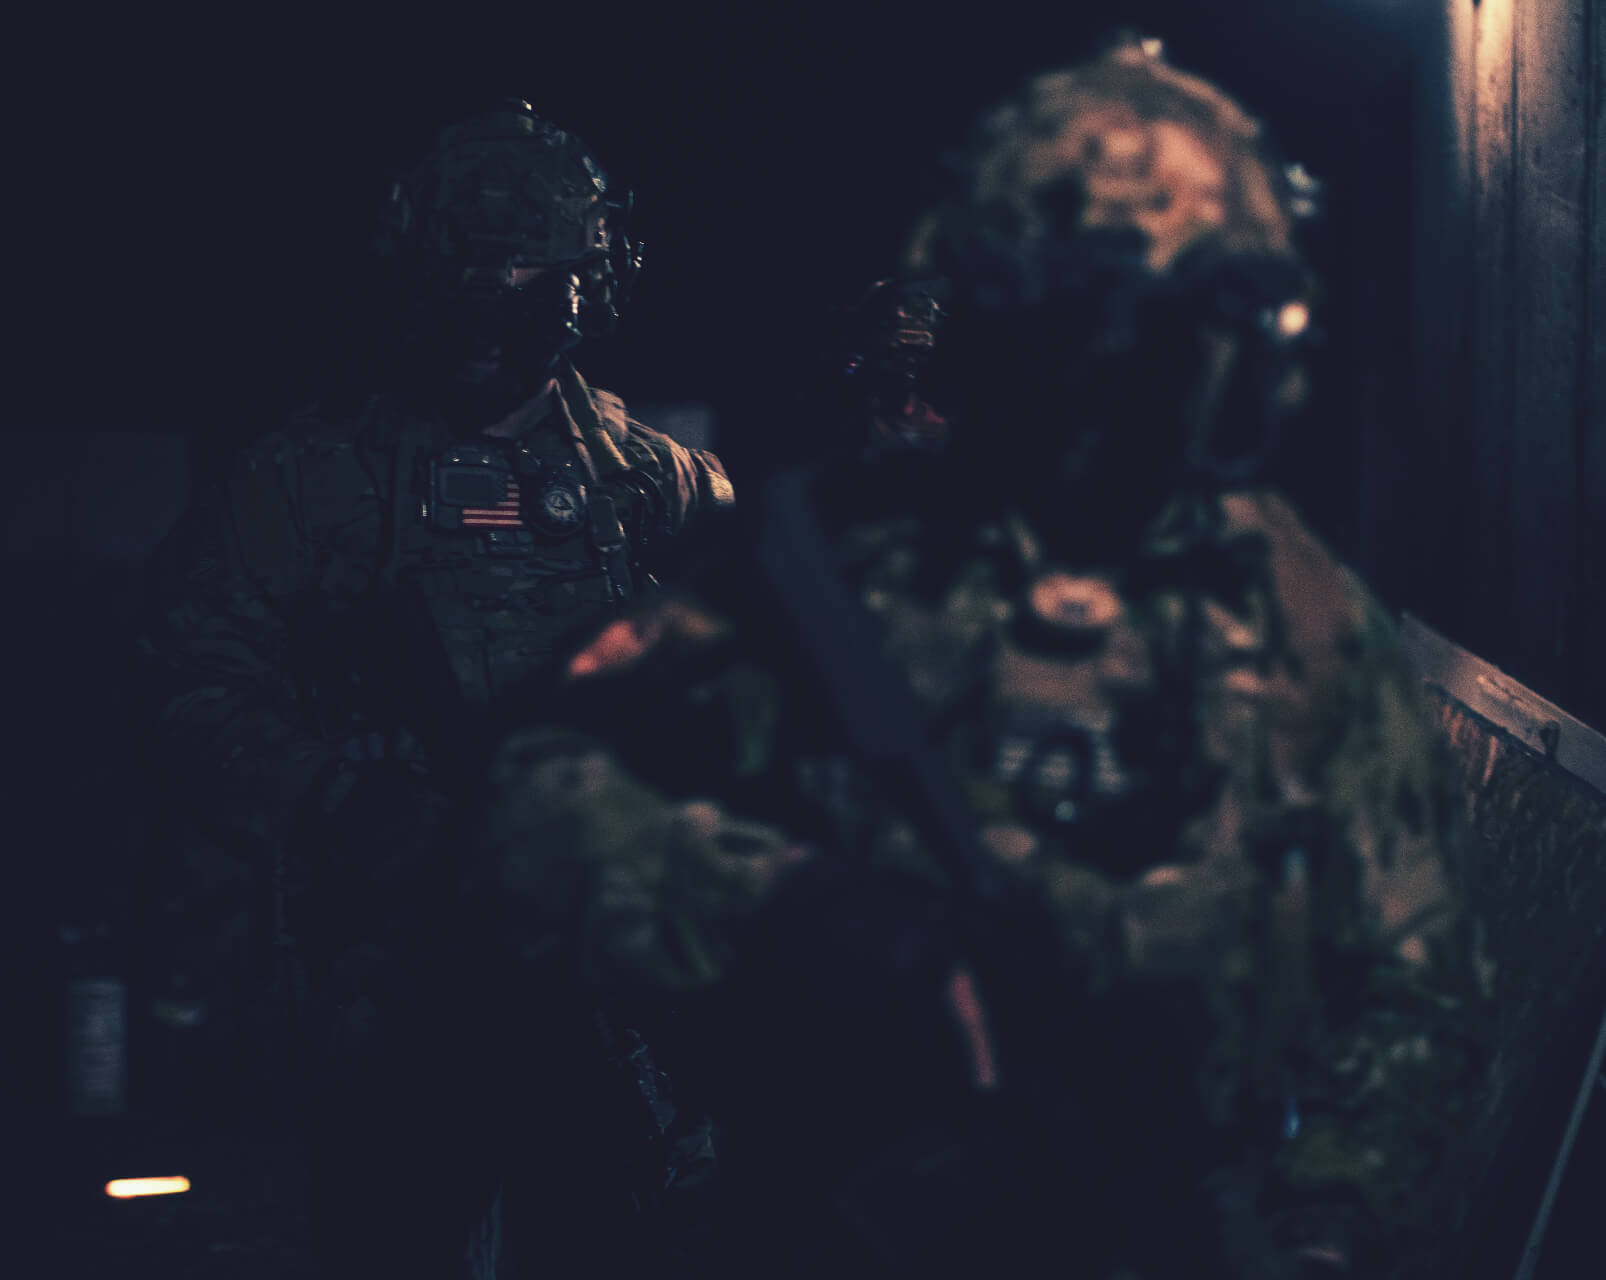 ATACLETE Army Special Forces wearing night vision